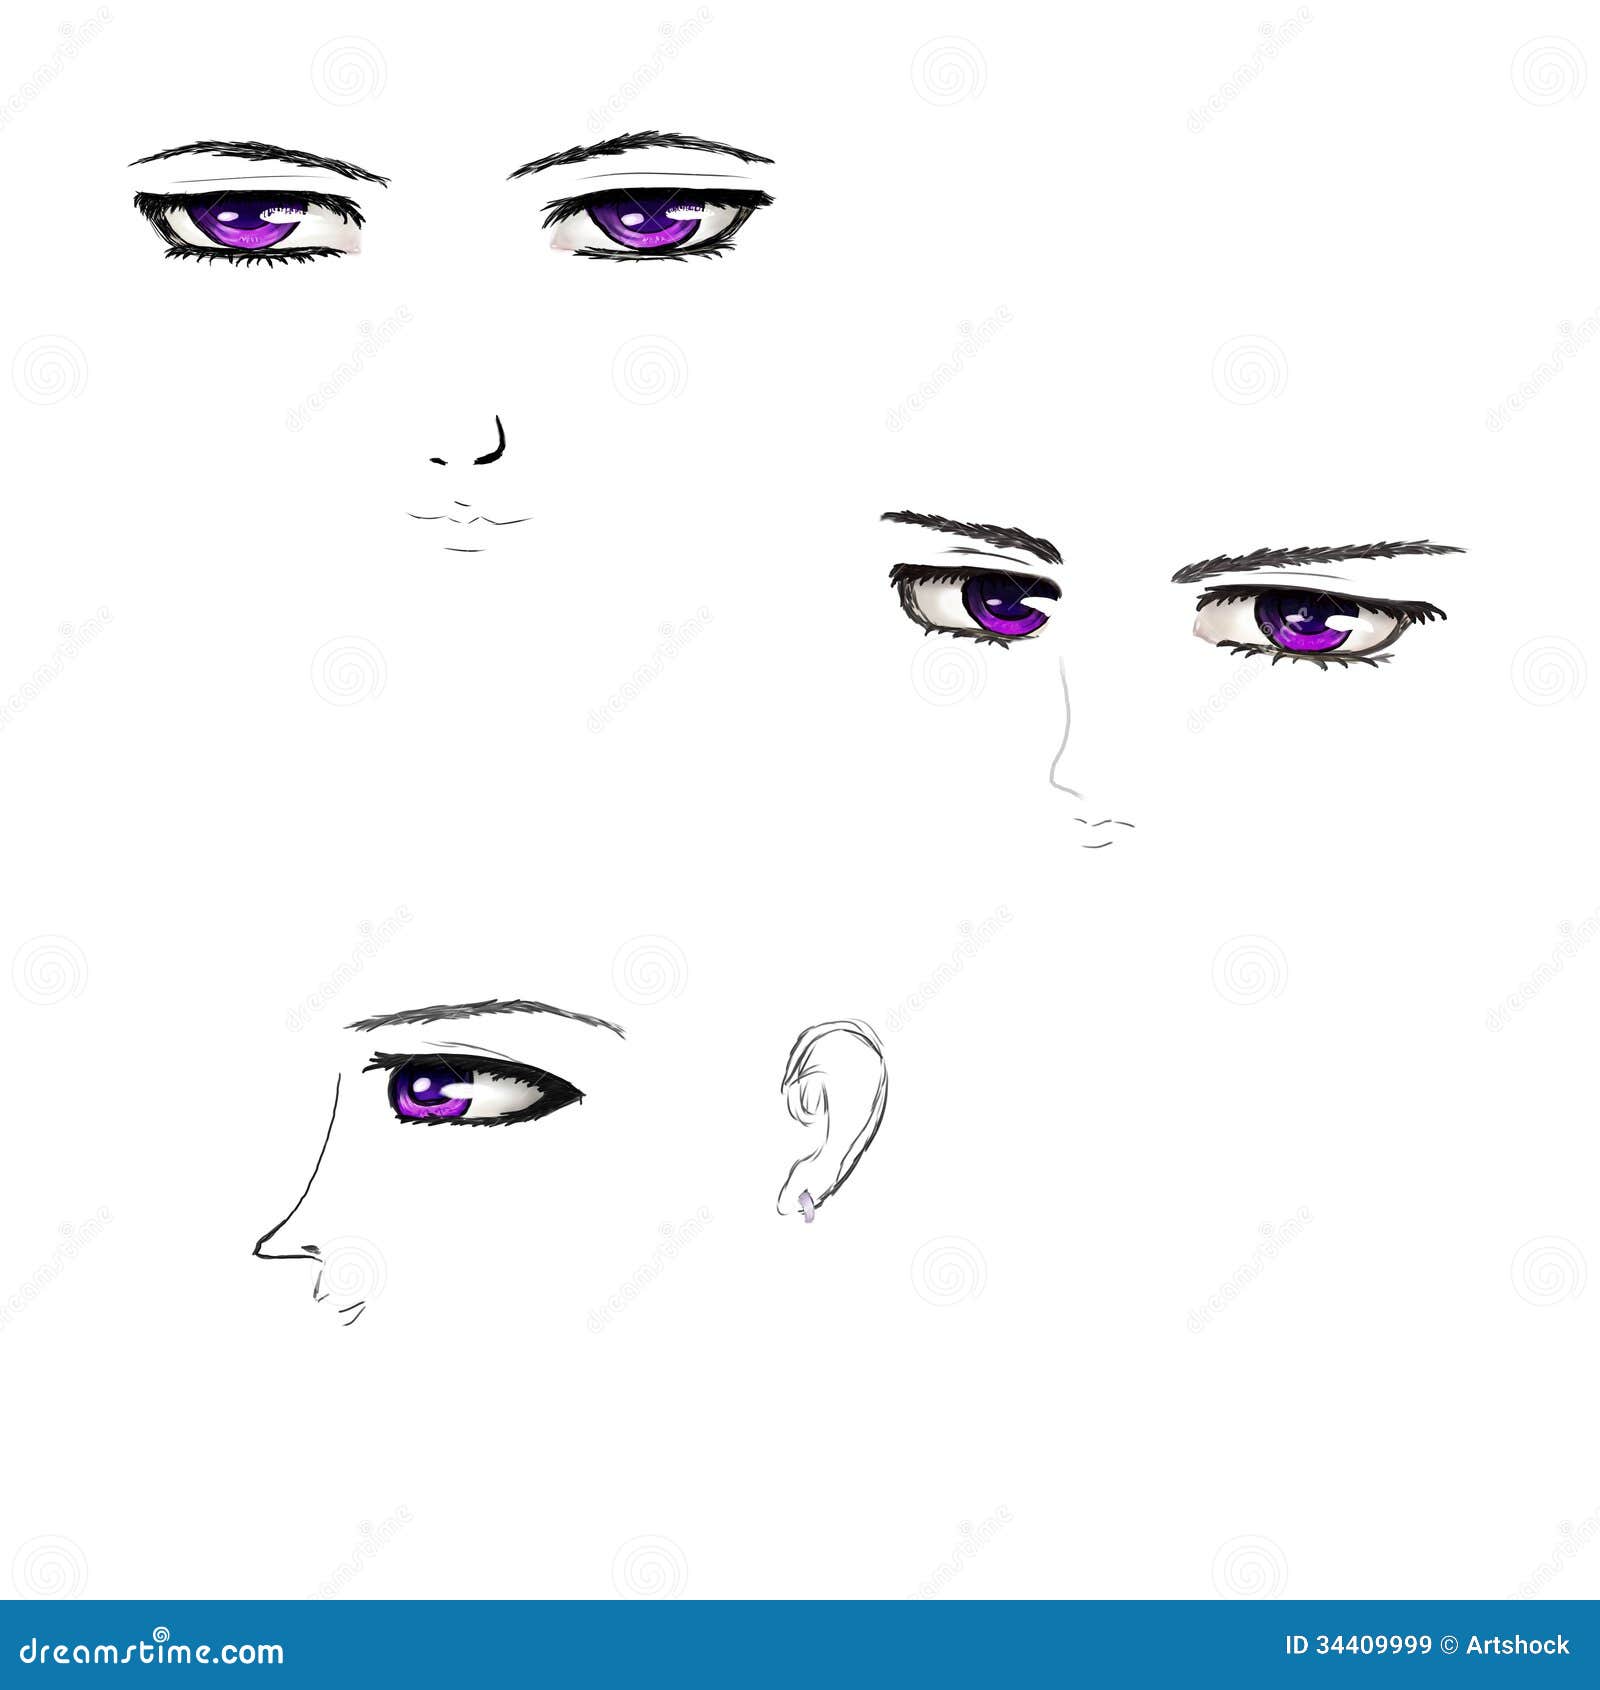 How to Draw Manga Female and Male Faces Reference Book